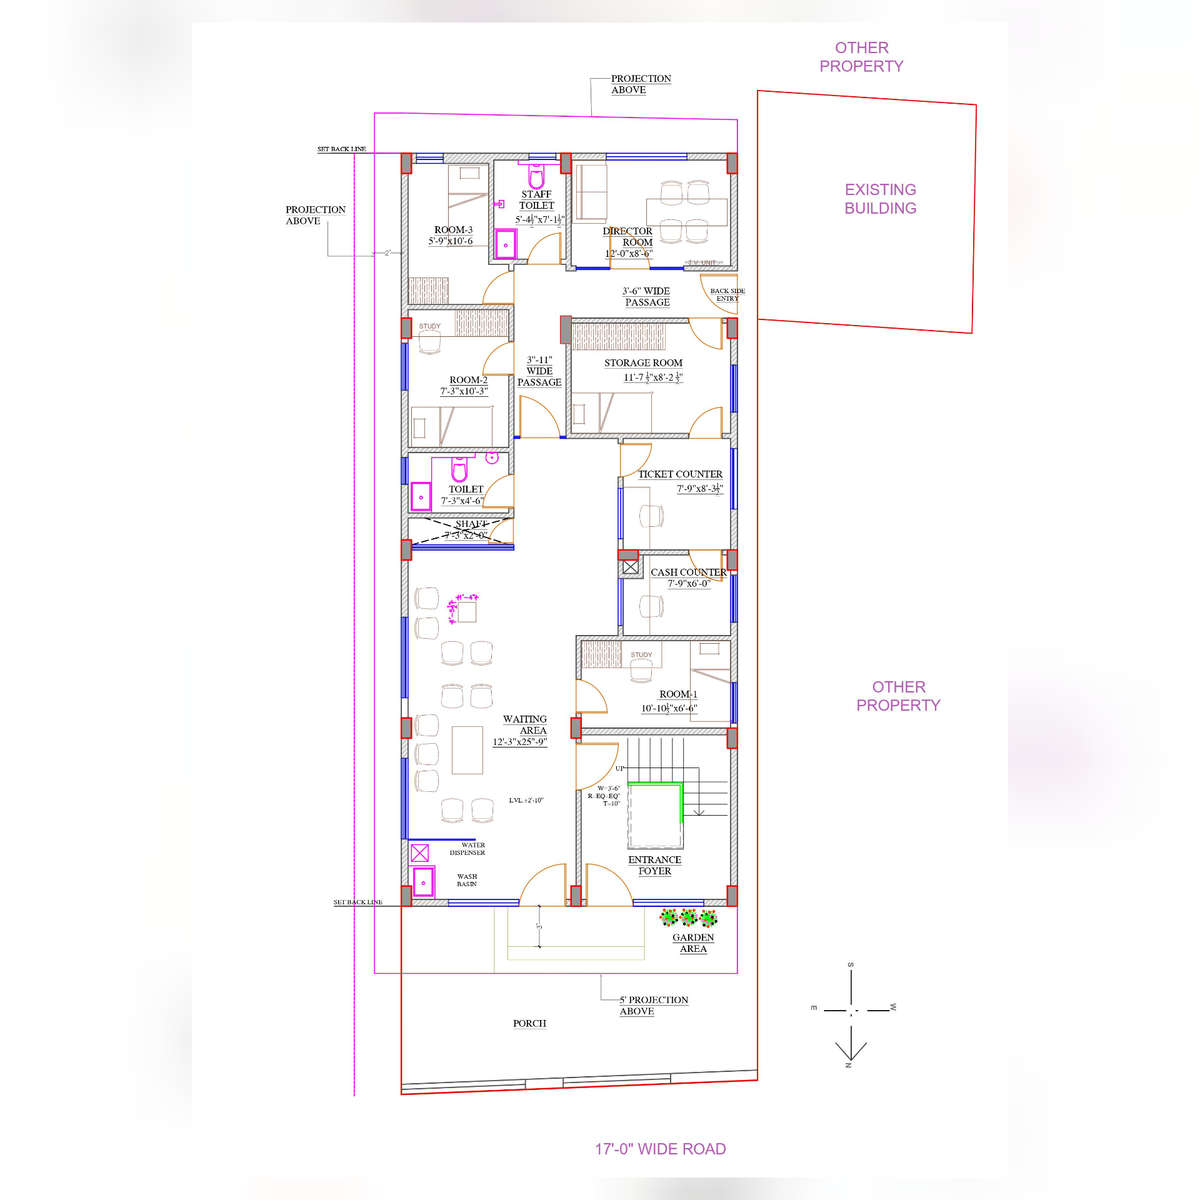 GROUND FLOOR AND TERRACE FLOOR PLAN OF OUR ONGOING SITE IN KATHIHAR 

#architecture #art #sculpture #school #education #learn #learning #teach #teaching #students #studentlife #play #children #sports #café #library #gym #arts #artist #designer #architect #creative #creativity #wayoflife #lifestyle #architecturestudent #buildings #construction #engineering